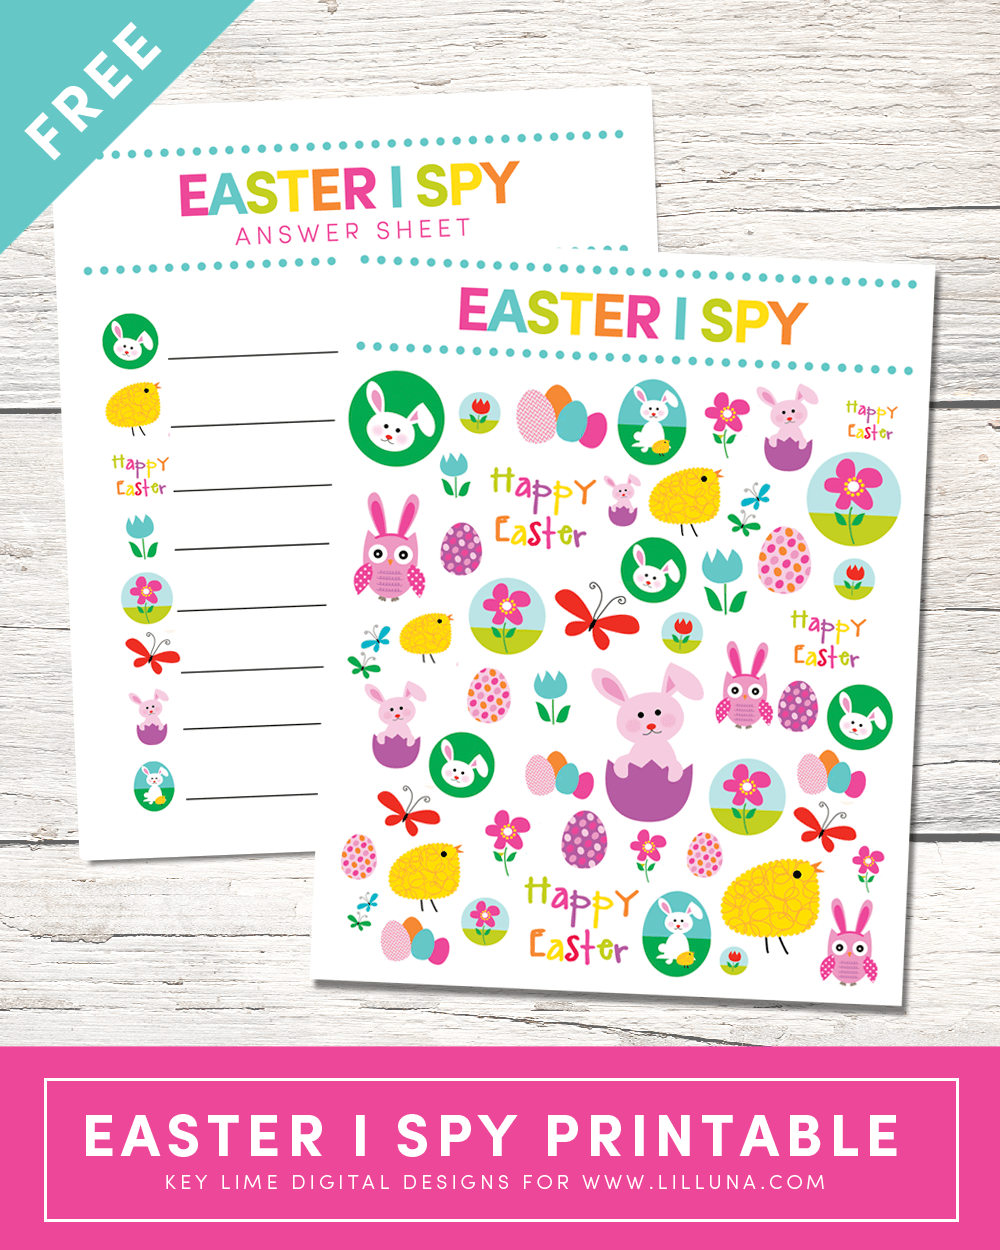 FREE Easter I Spry Printable - a super cute printable and game for the kids to play for Easter parties or even Easter Sunday!